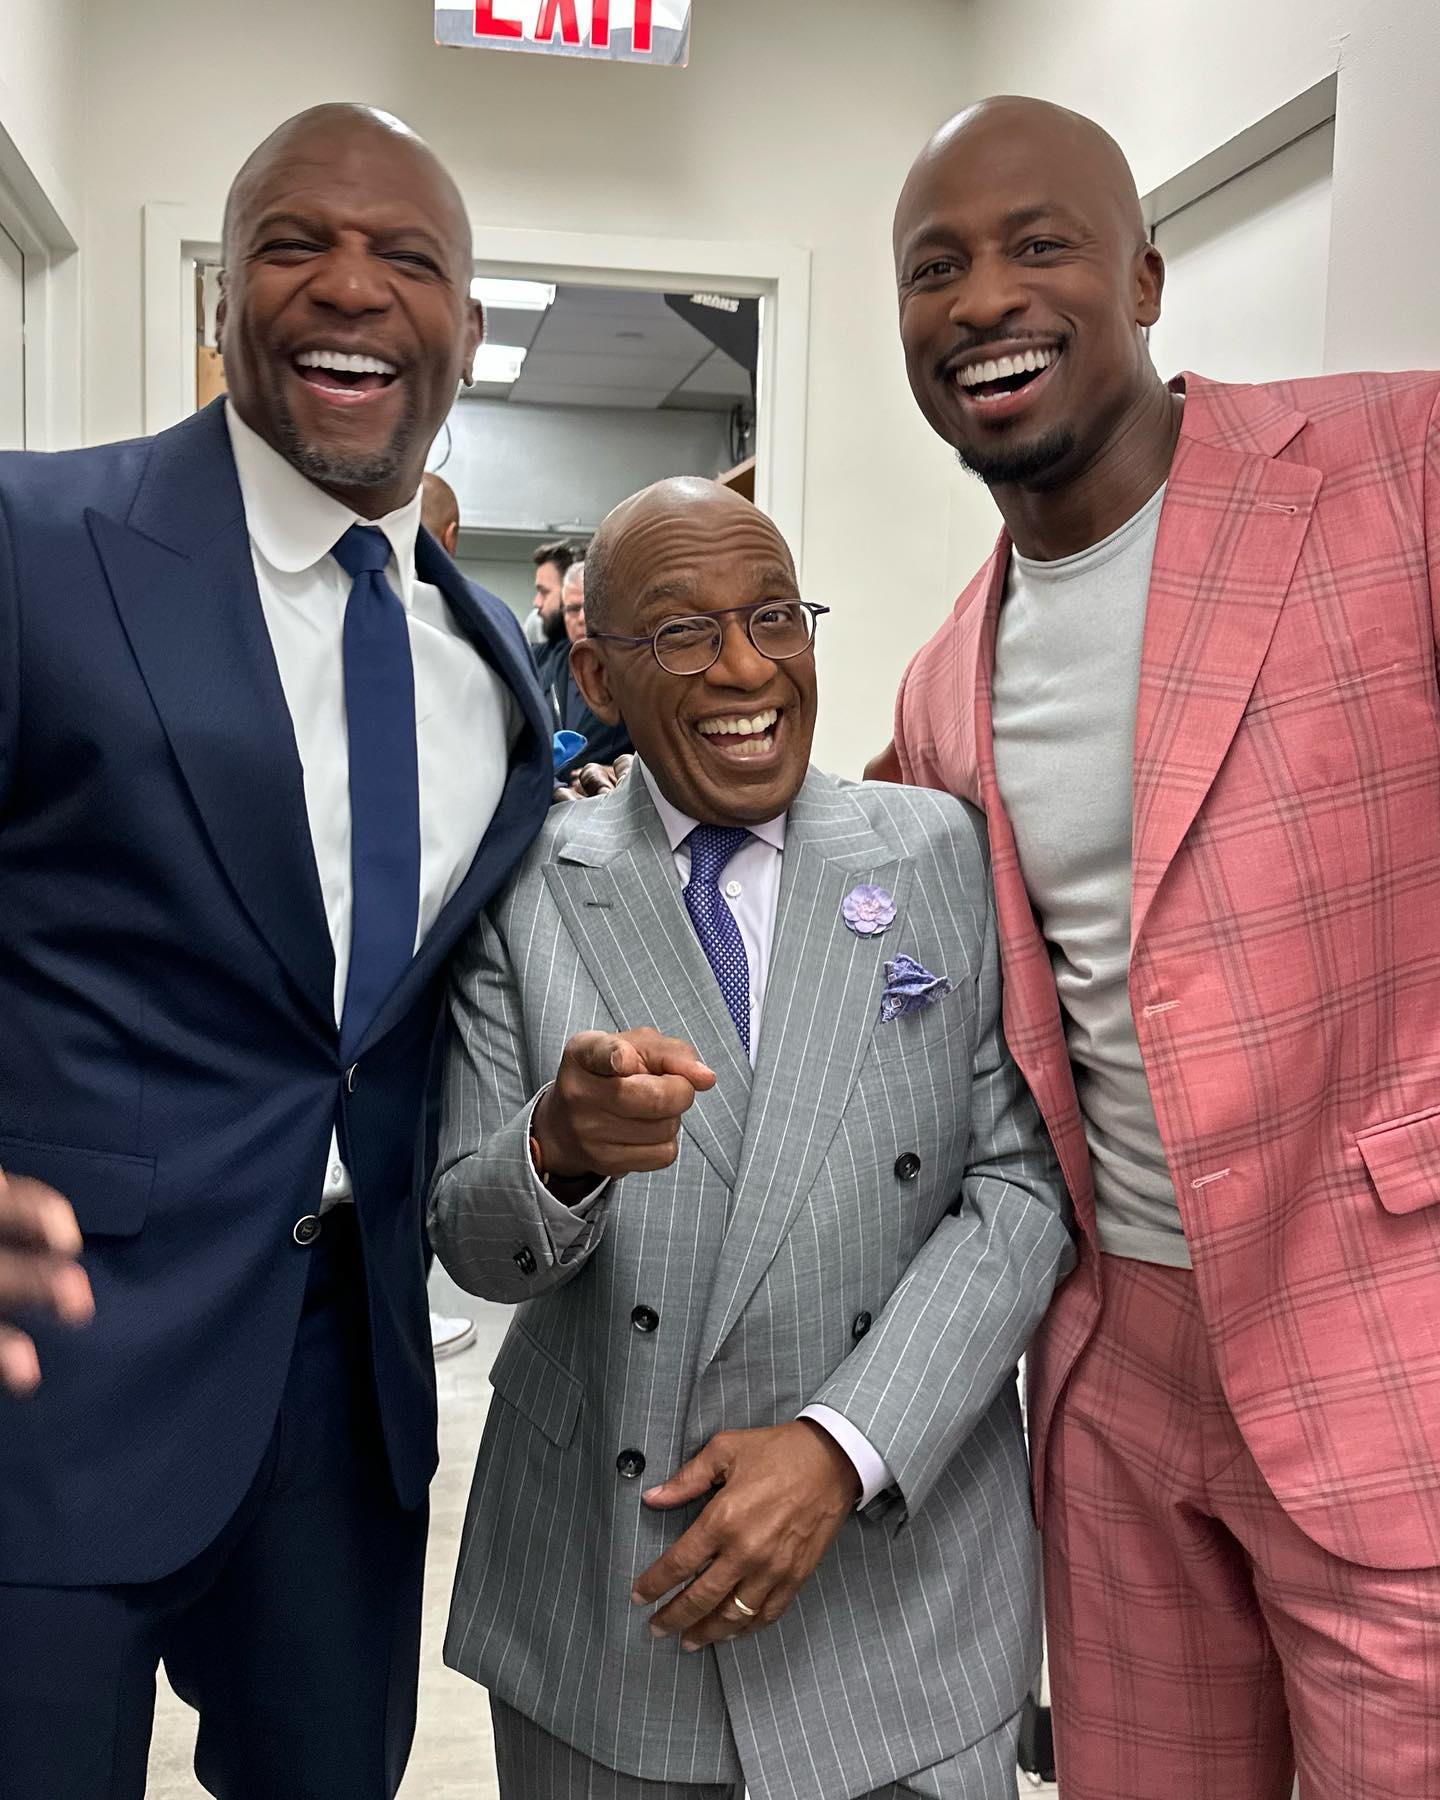 GMA fans were shocked at Al Roker's actual height in a new photo with